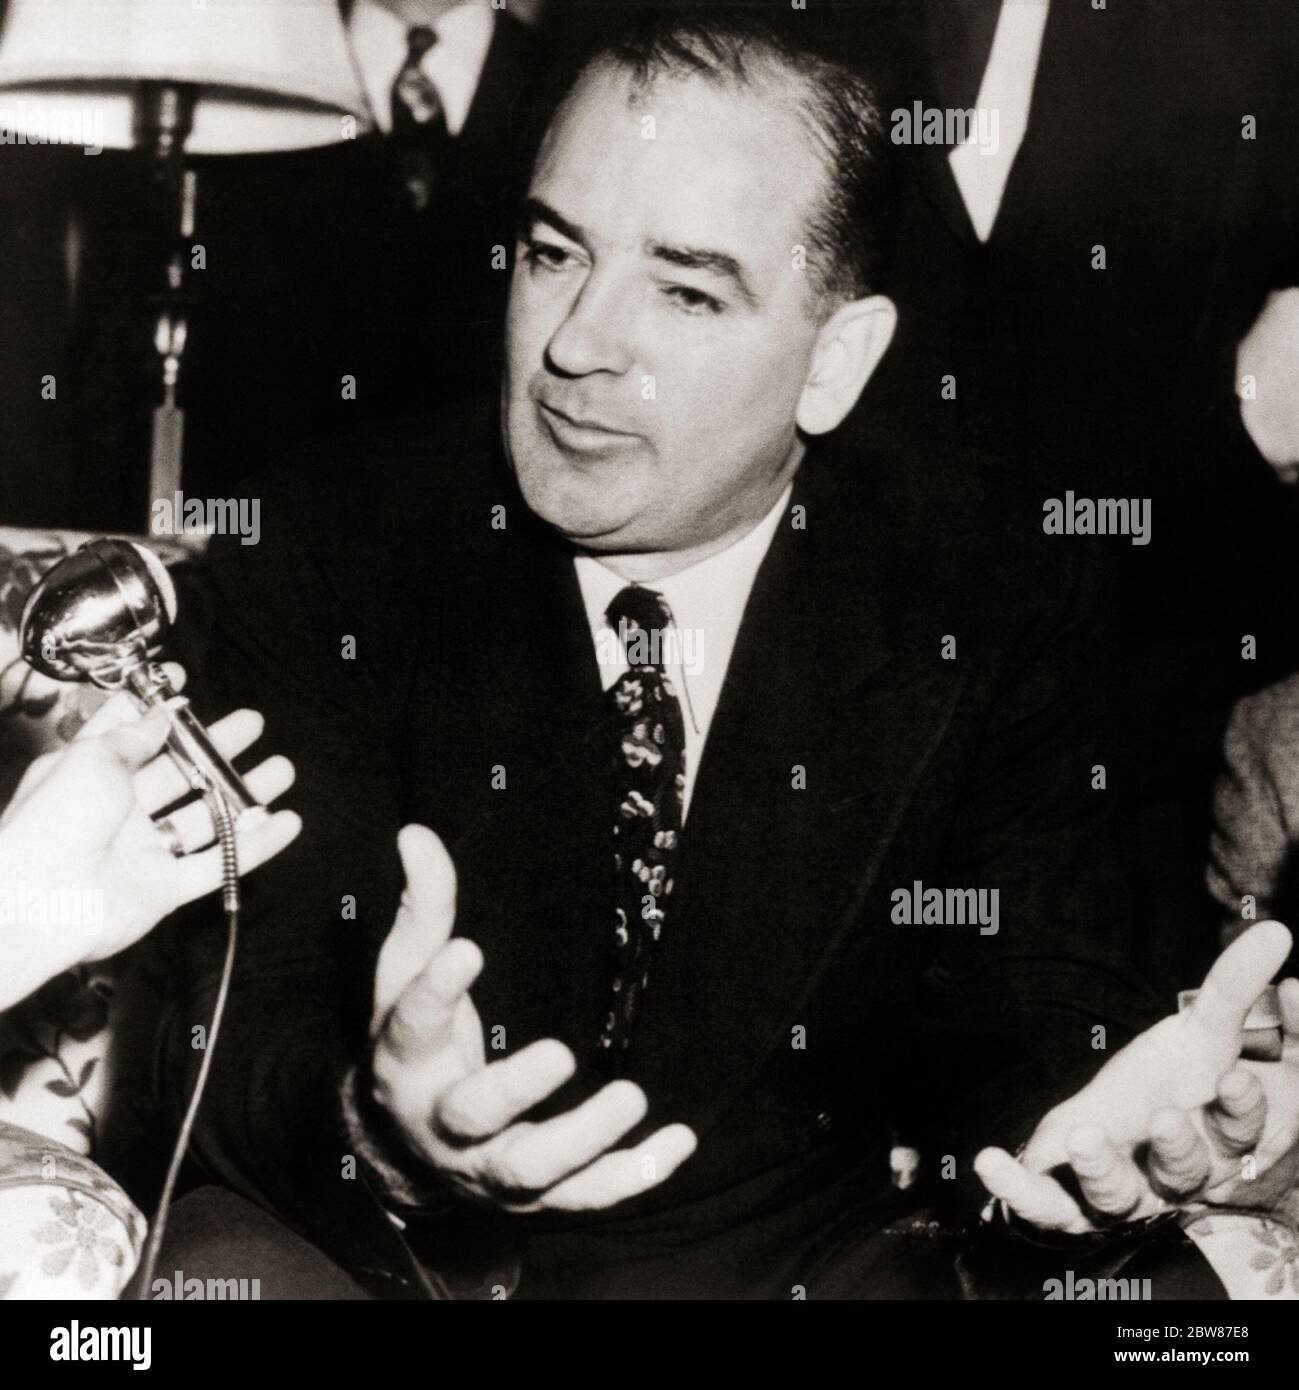 1950s 1954 WISCONSIN SENATOR JOSEPH RAYMOND McCARTHY  SPEAKING INTO MICROPHONE DURING ARMY-McCARTHY HEARINGS WASHINGTON DC USA  - asp fwp3045 ASP001 HARS POWERFUL JOSEPH FALSE INTO OF OCCUPATIONS POLITICS CAMPAIGN CONCEPTUAL LIAR MID-ADULT MID-ADULT MAN WI 1954 BLACK AND WHITE CAUCASIAN ETHNICITY COMMUNISM DURING OLD FASHIONED SENATOR TACTICS Stock Photo